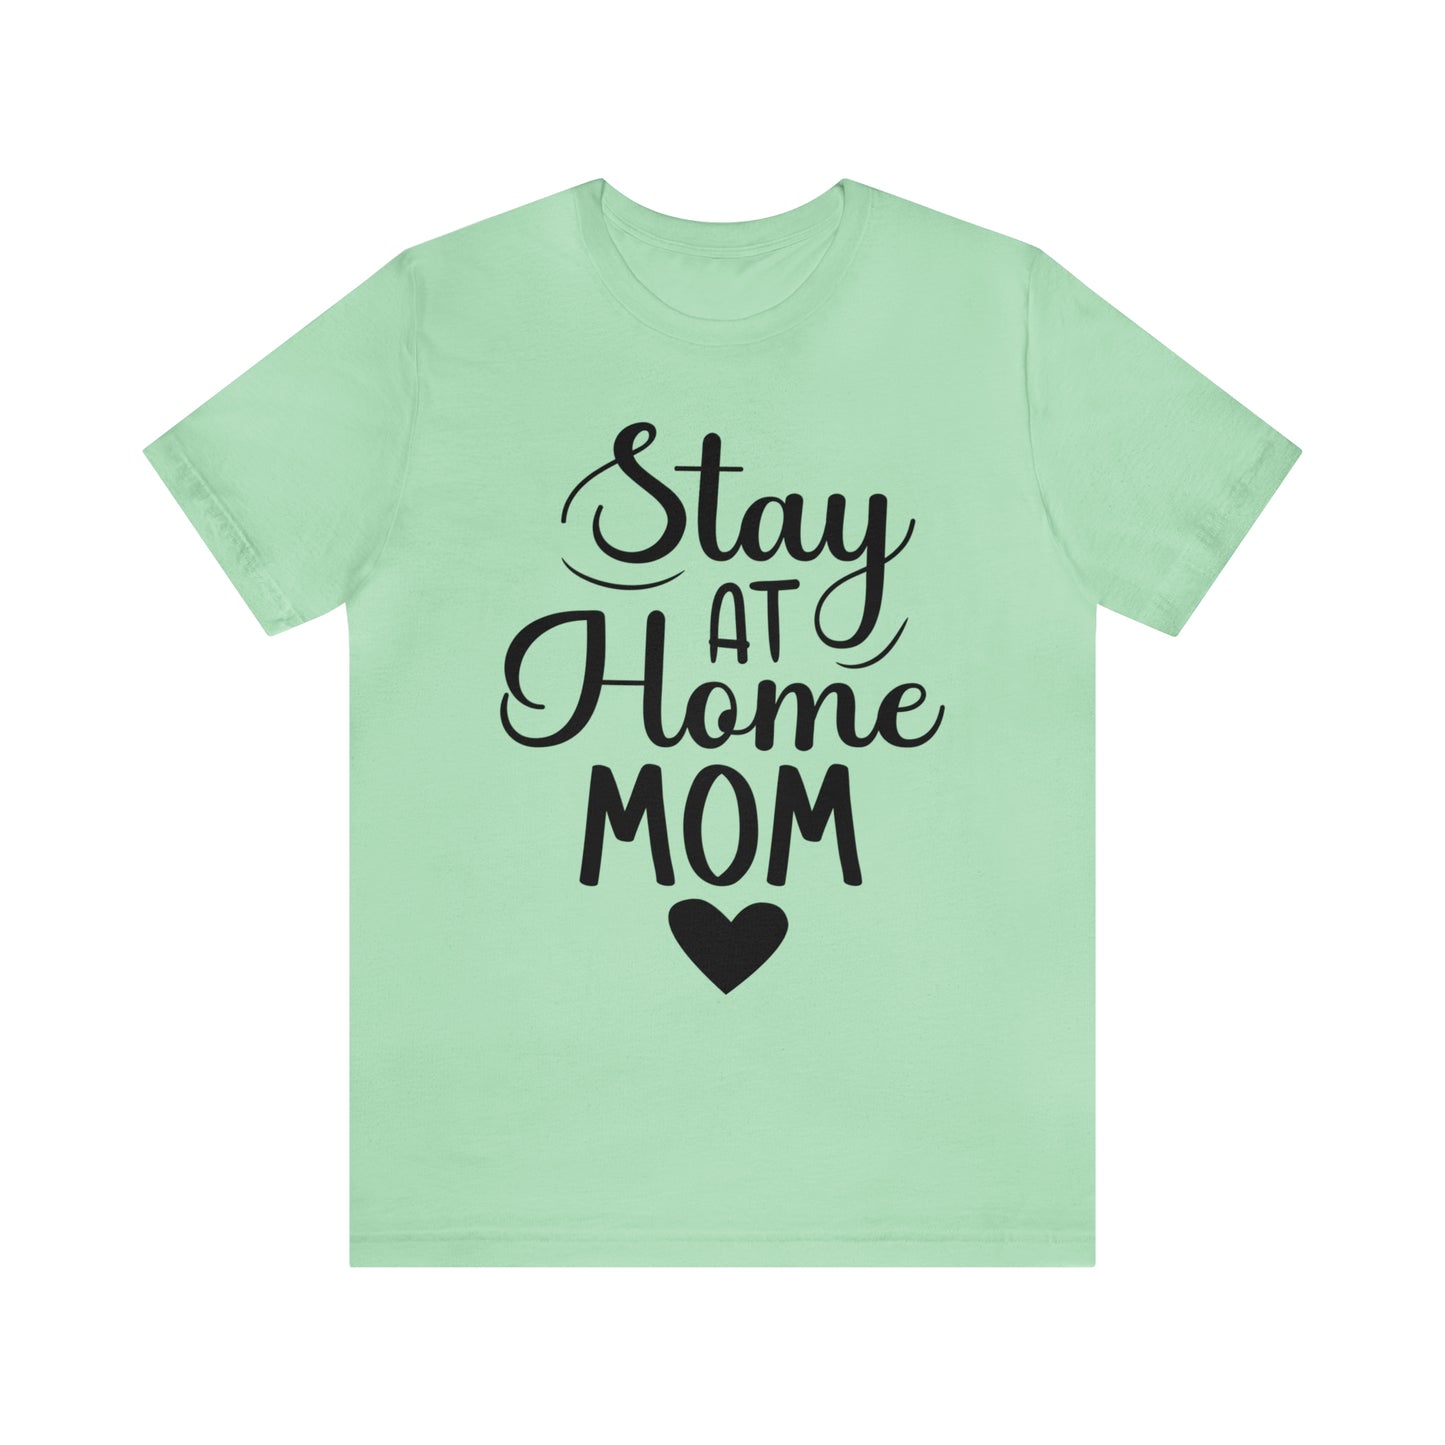 Stay at home mom Short Sleeve Women's Tee